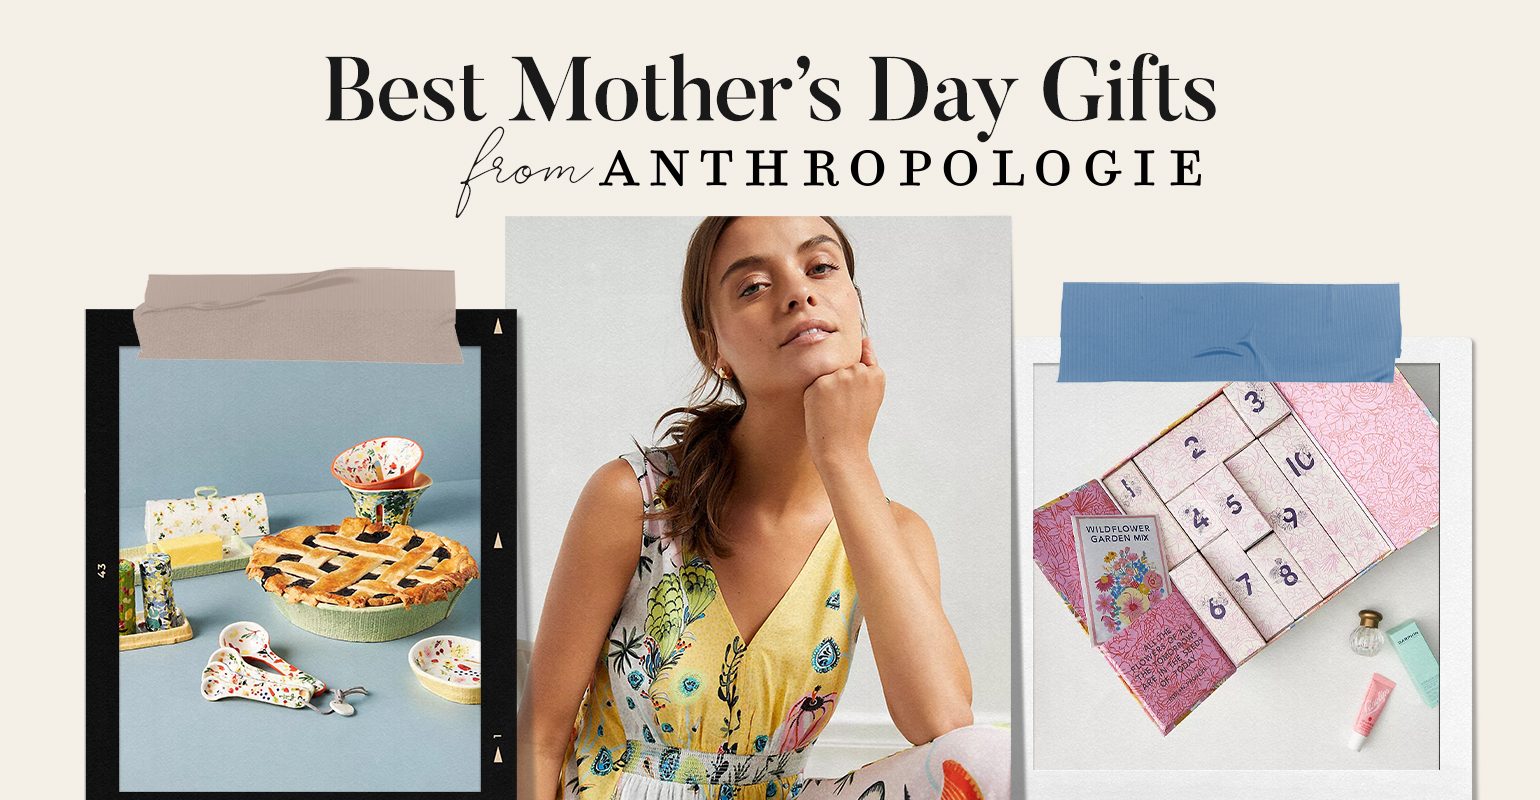 Surprise Mom with These Best Mother’s Day Gifts from Anthropologie